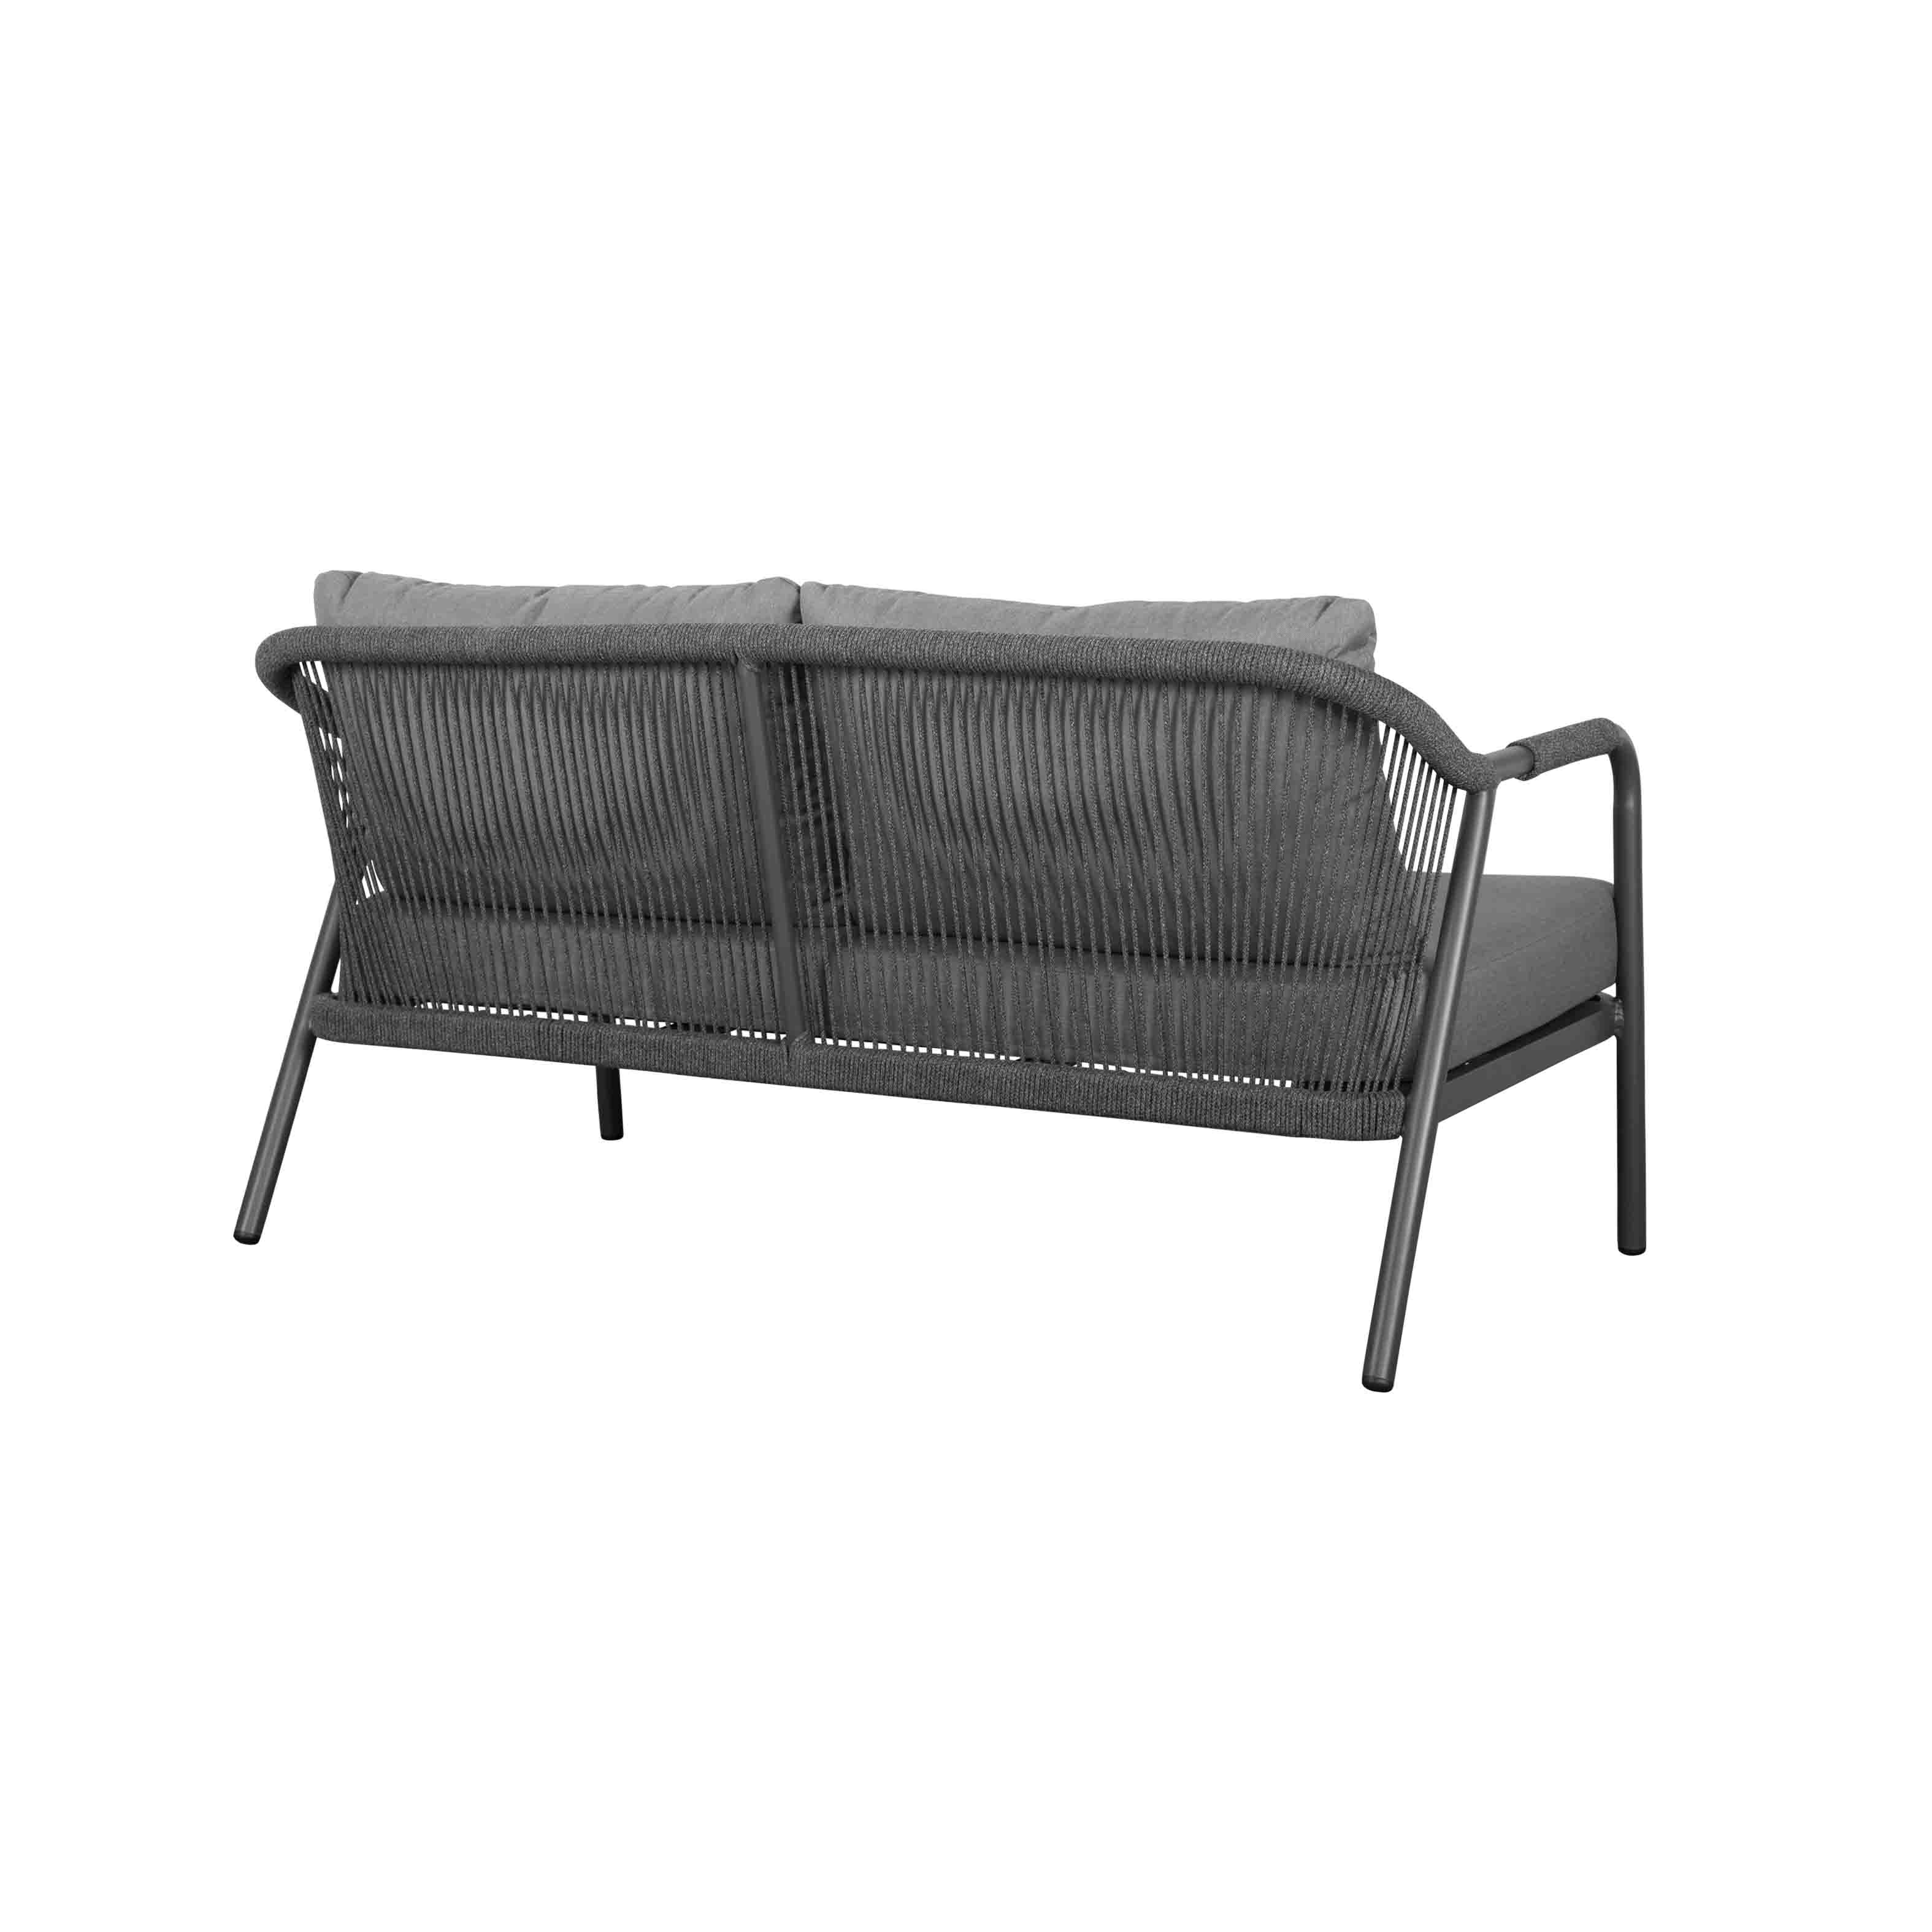 Roger rope 2-seat sofa S3